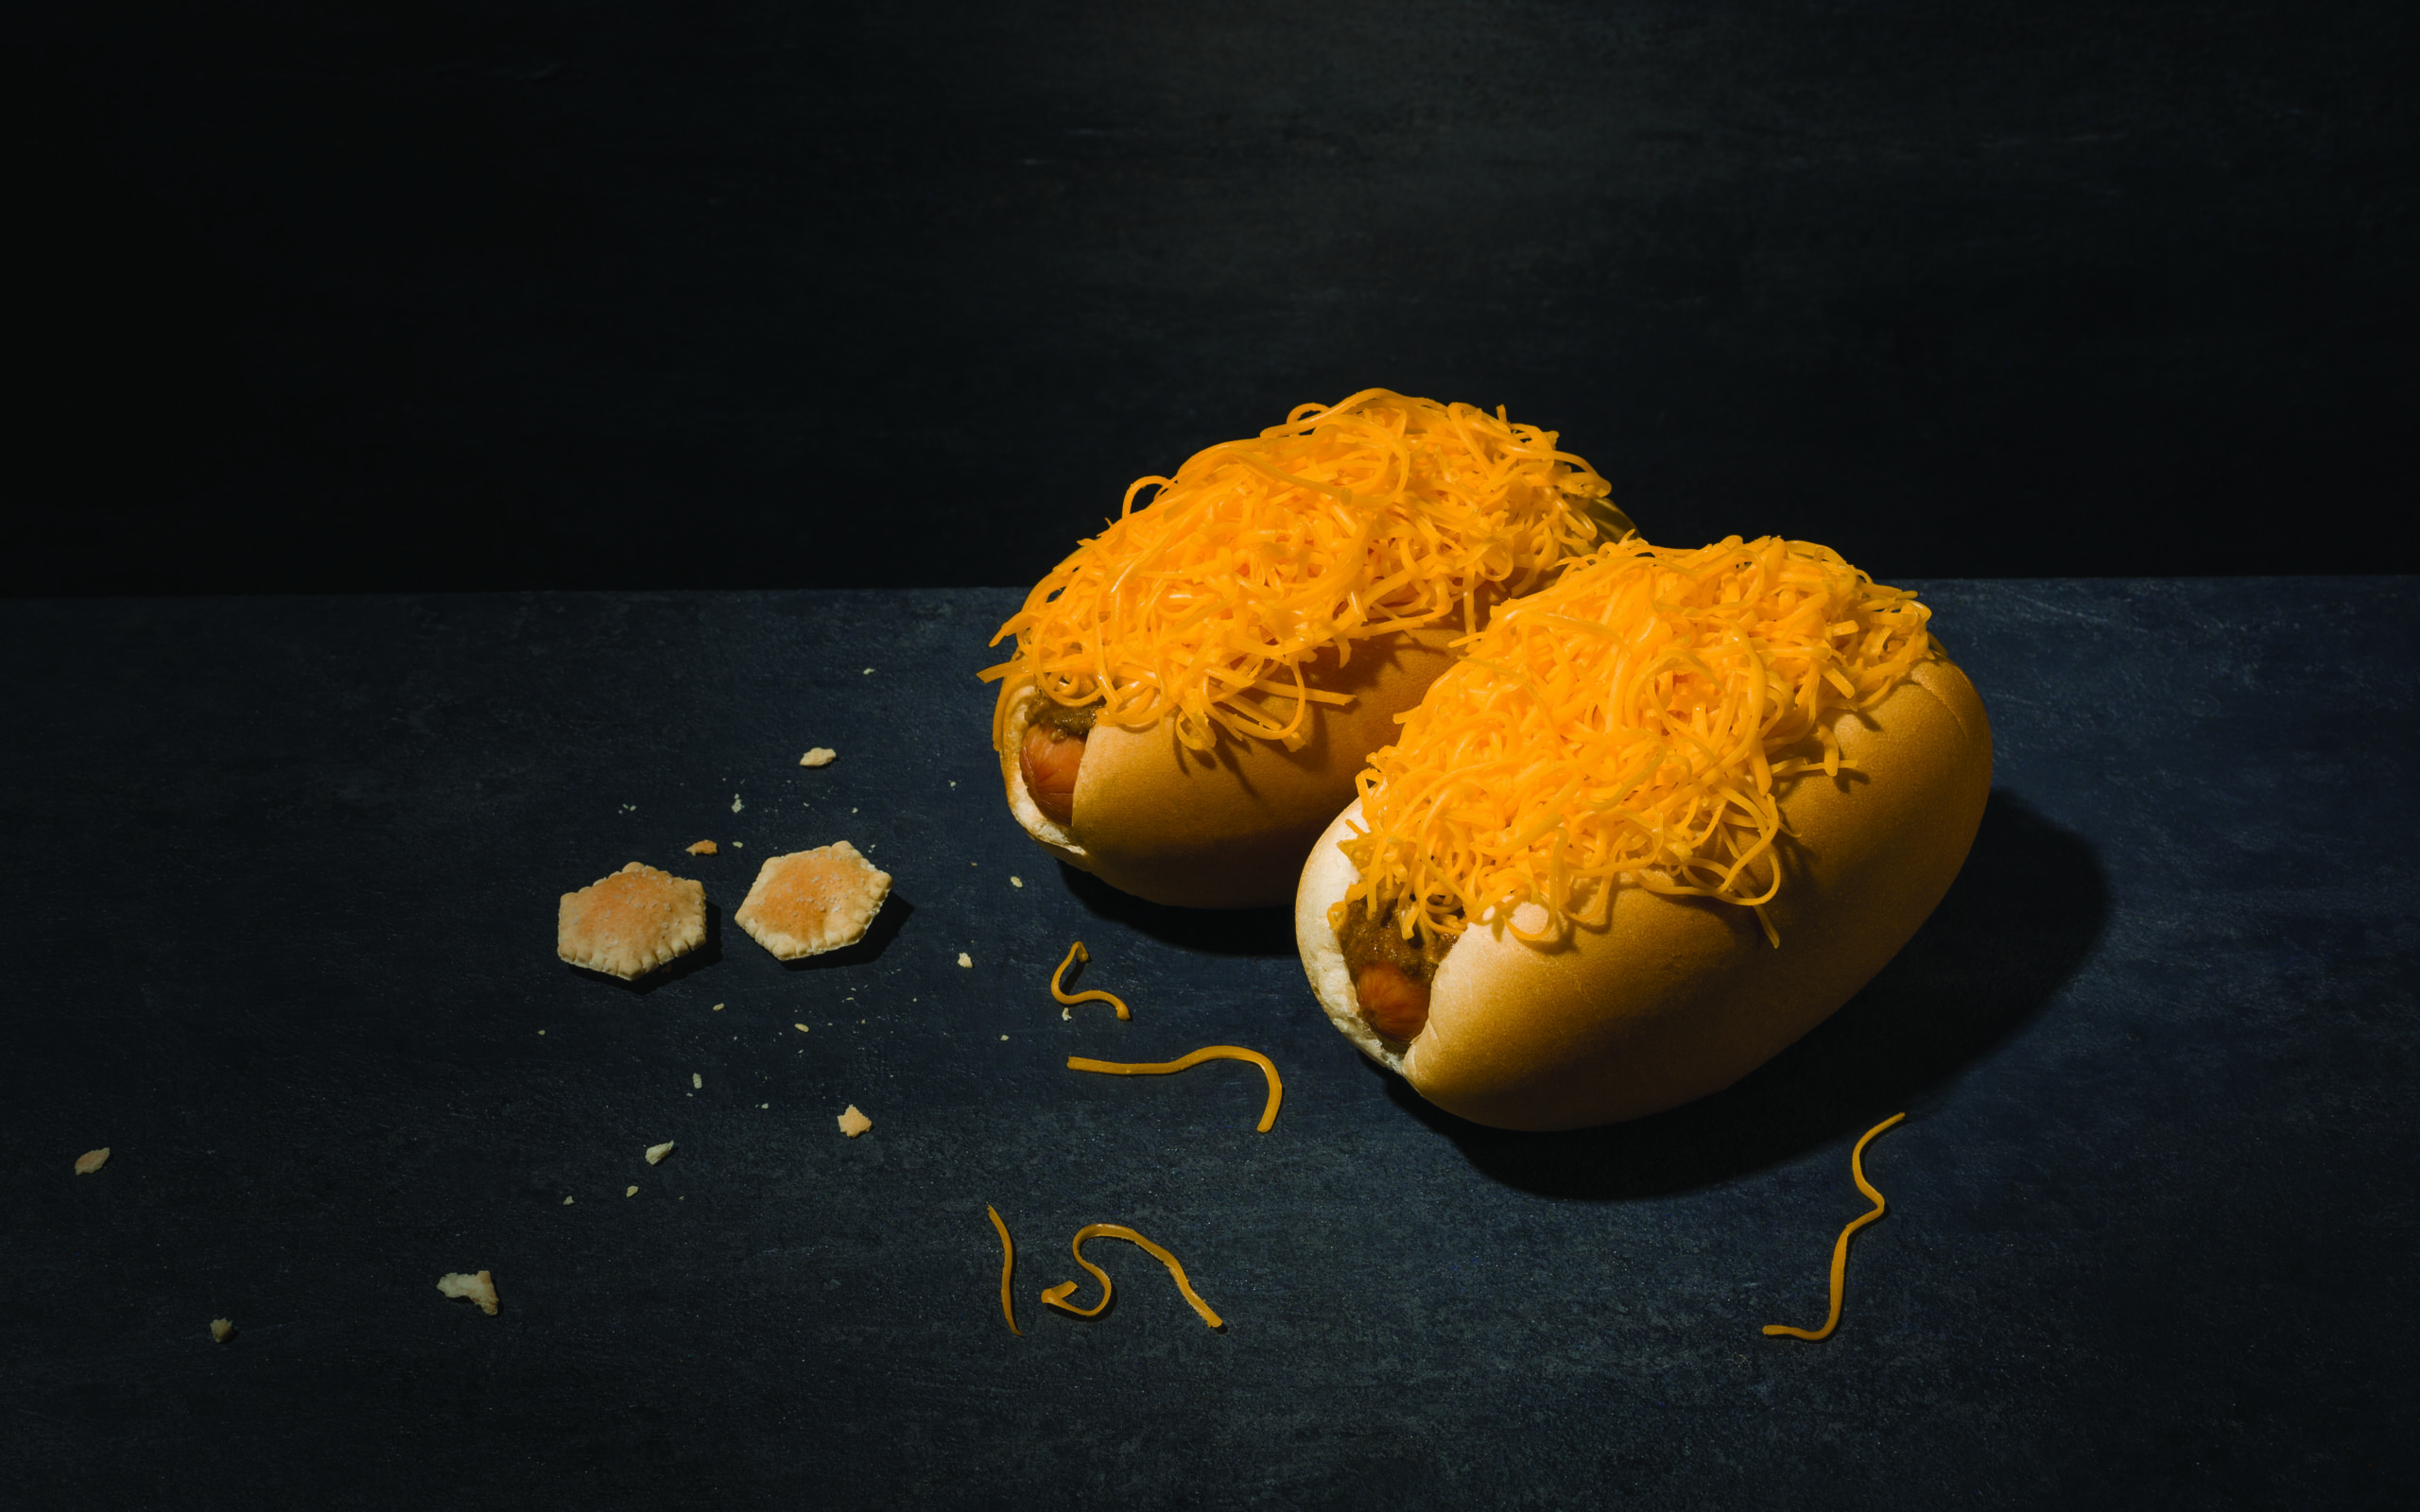 Gold Star Offers Free Coneys for National Chili Dog Day – Cincy